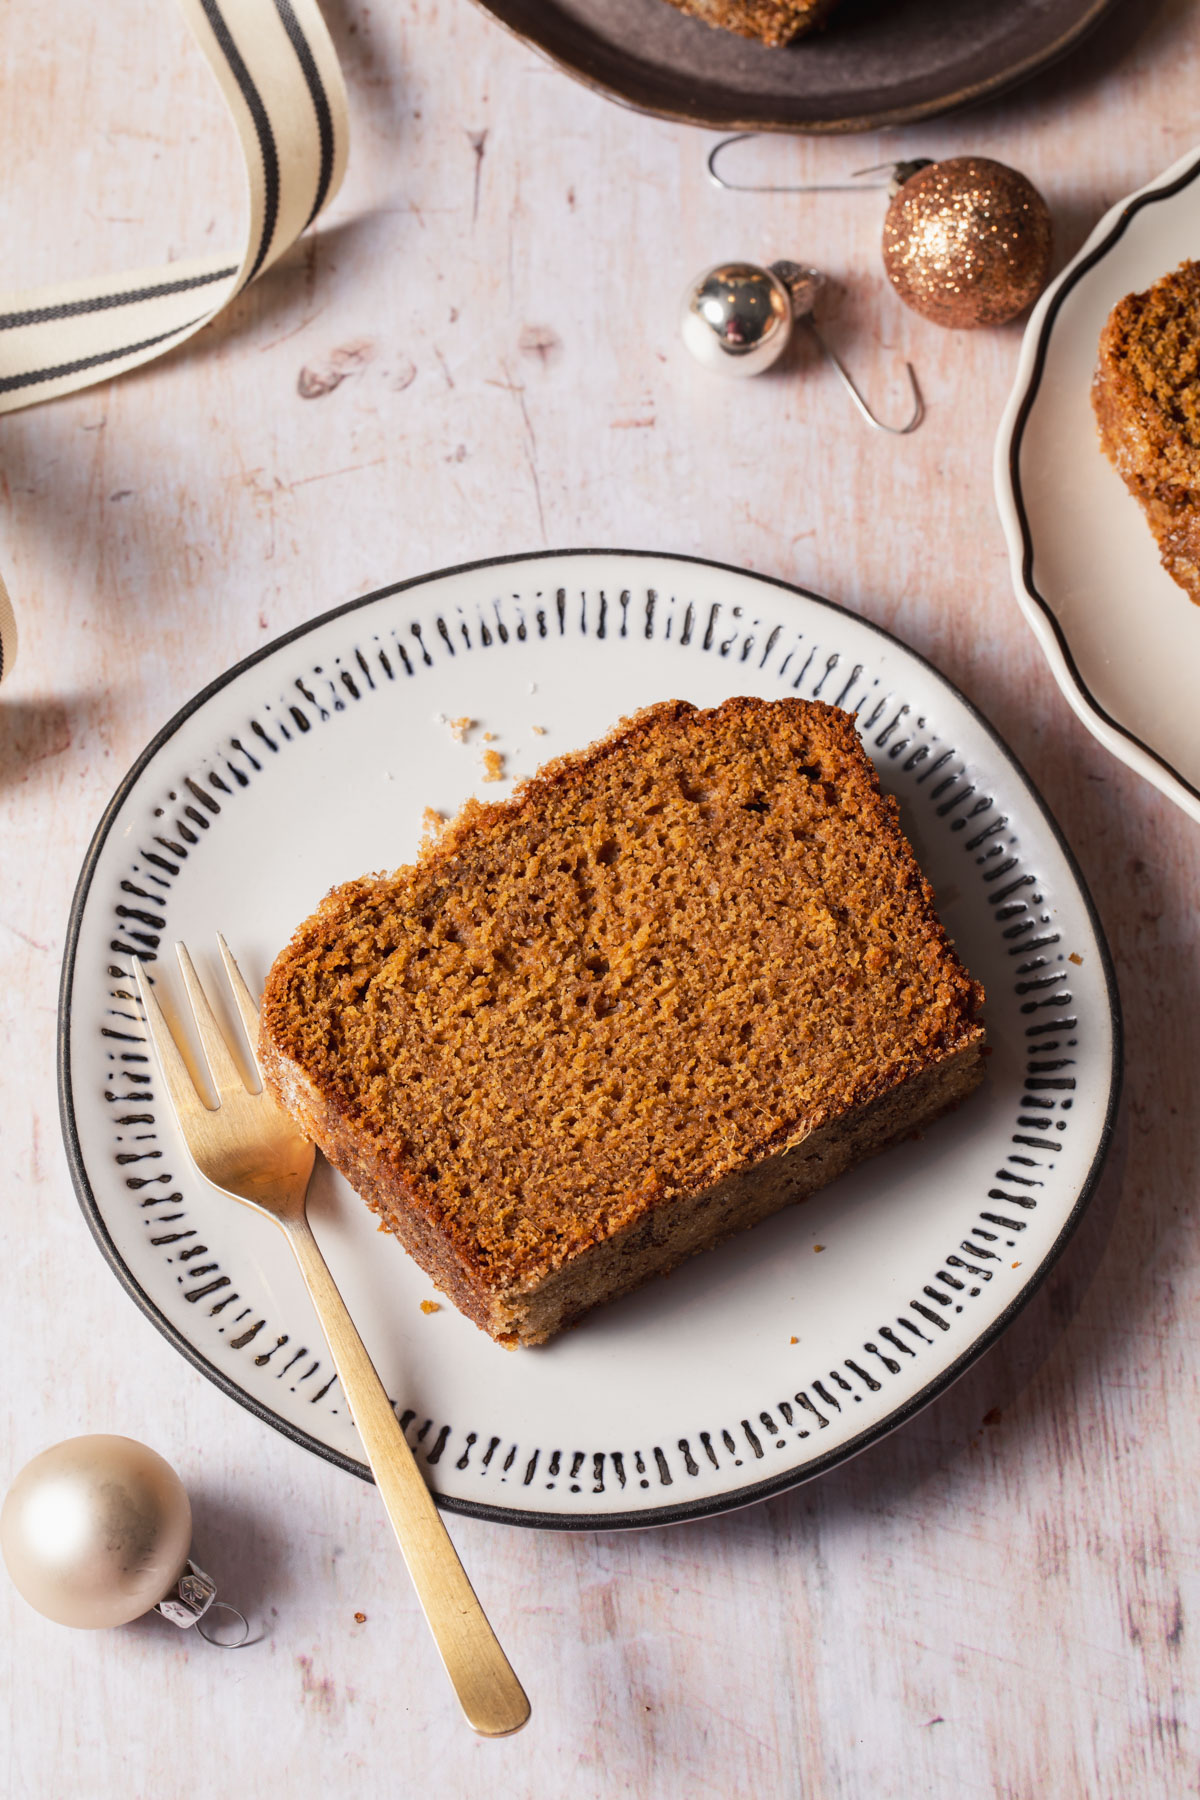 A slice of ginger loaf cake on a plate set on a wooden table with a gold fork